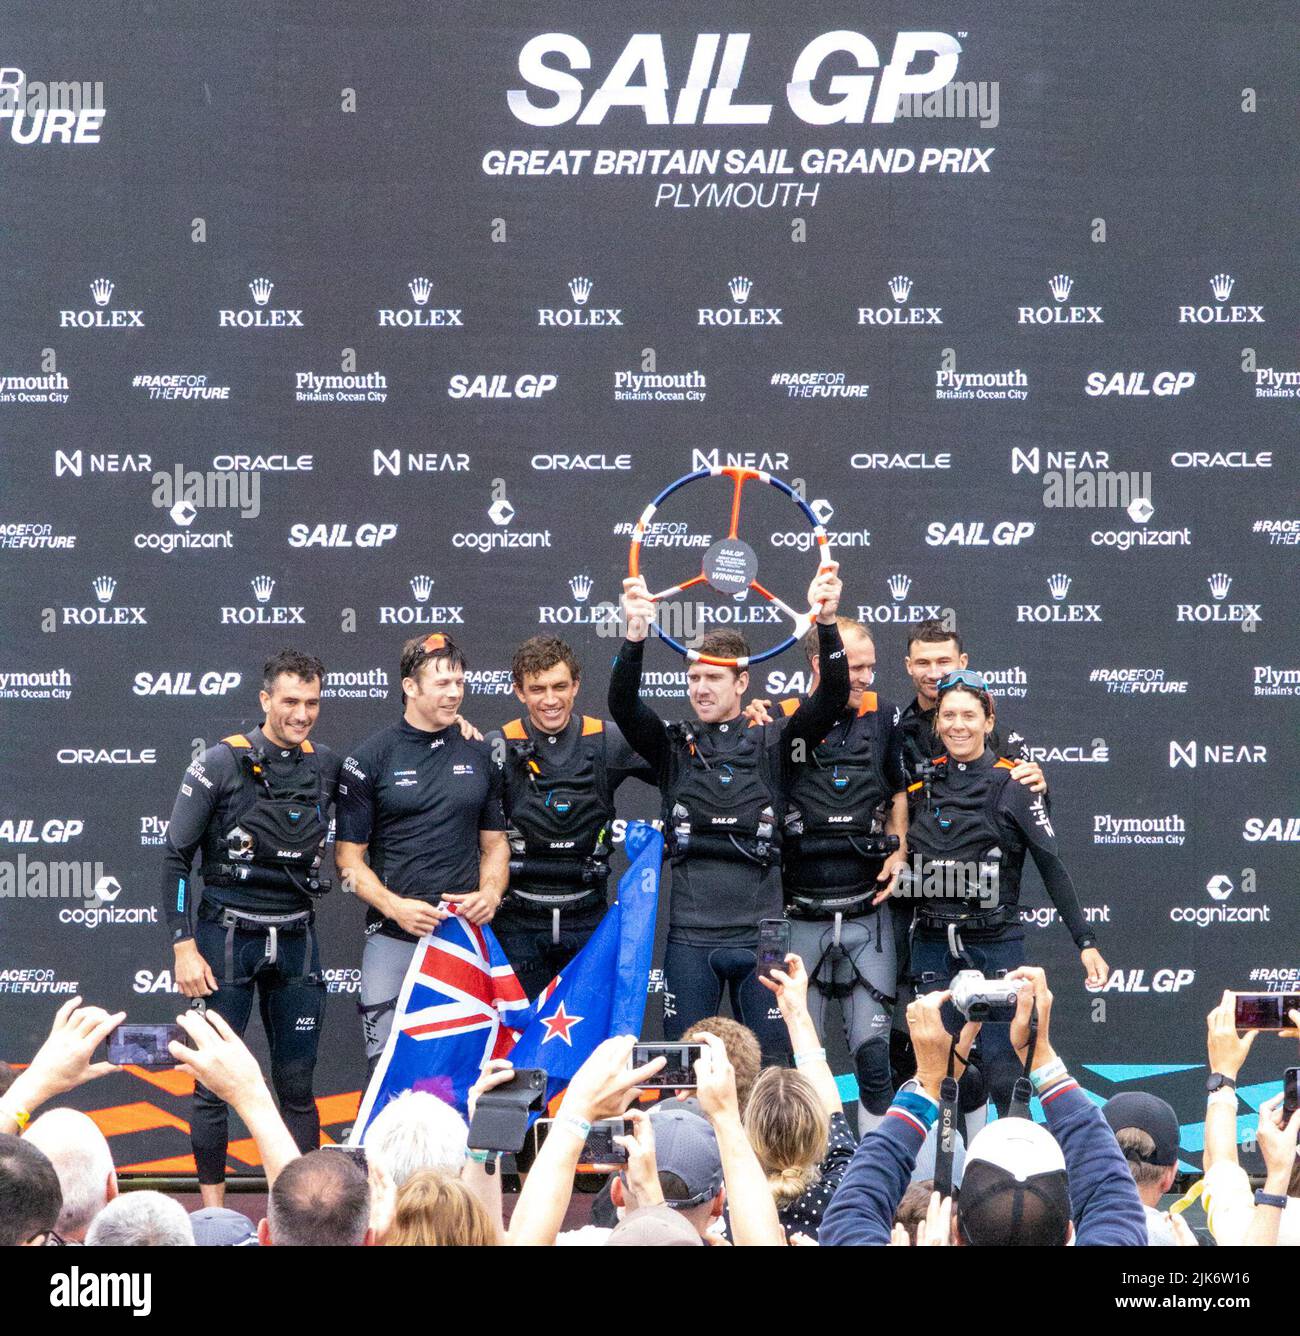 SailGP, Plymouth, UK. 31st July, 2022. New Zealand are crowned overall winners at the Final day for the Great British Sail Grand Prix. Britain's Ocean City hosts the third event of Season 3 as the most competitive racing on water. The event returns to Plymouth on 30-31 July. Credit: Julian Kemp/Alamy Live News Stock Photo